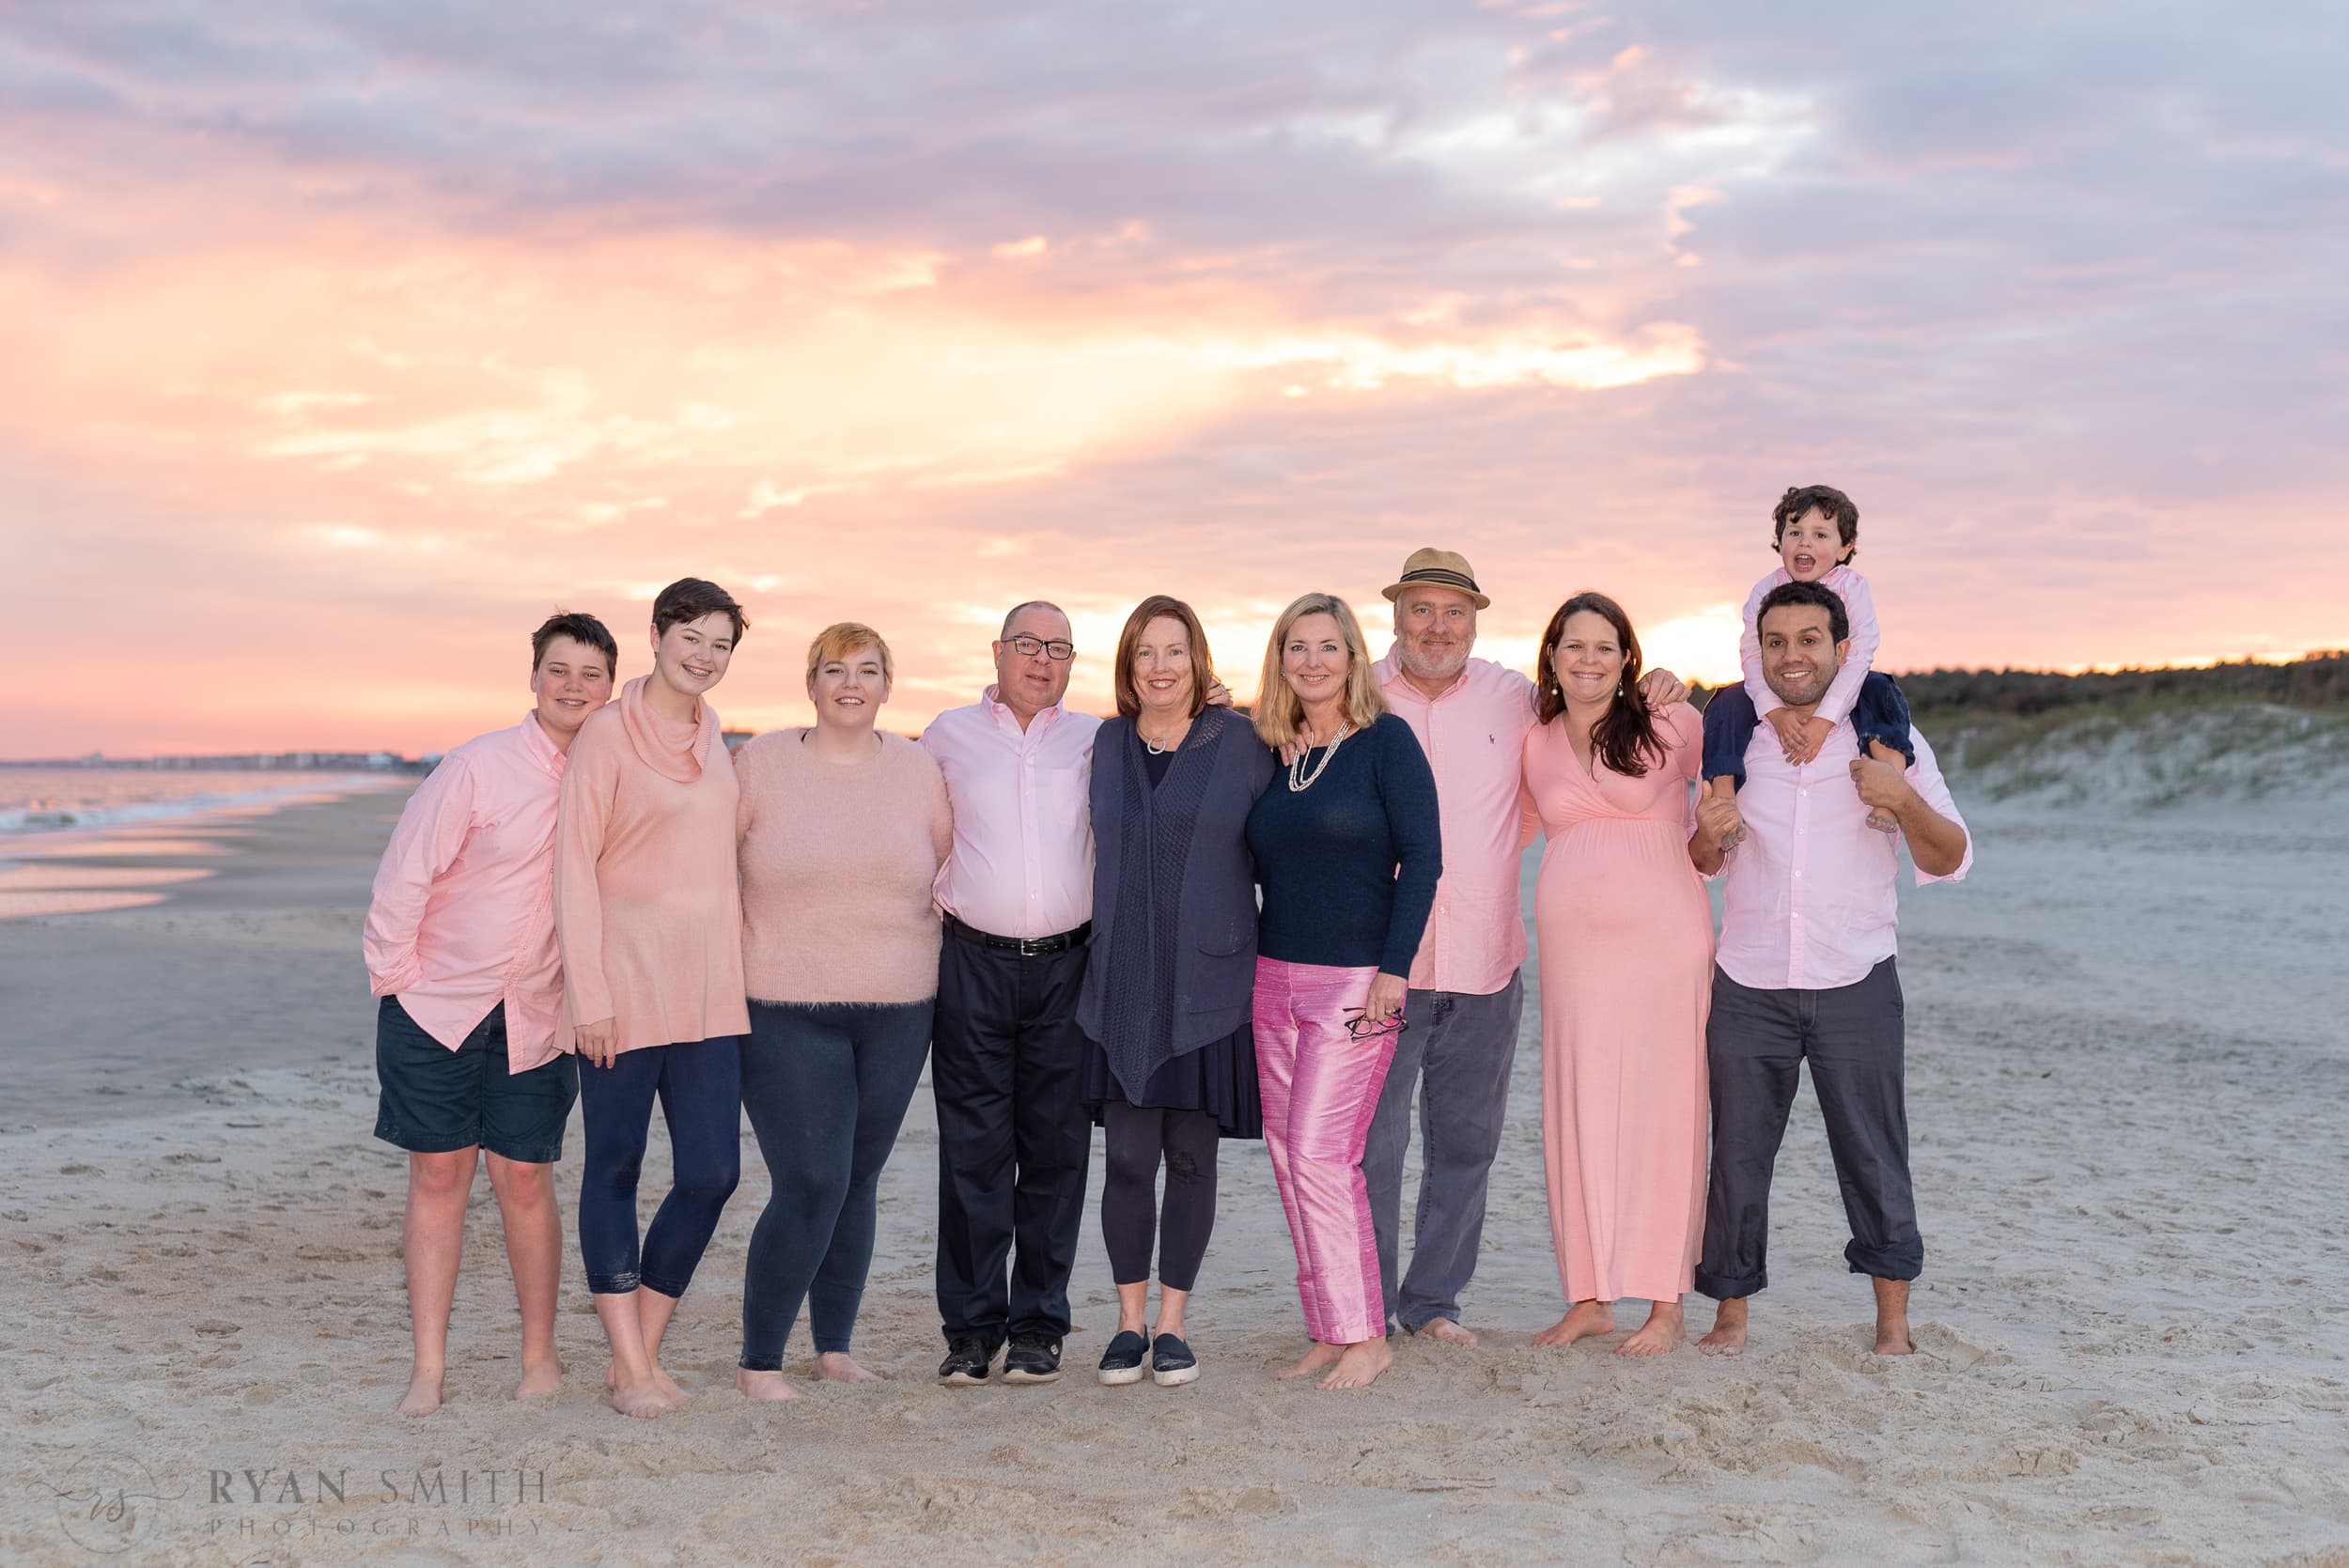 Sunset at the end of the family session -